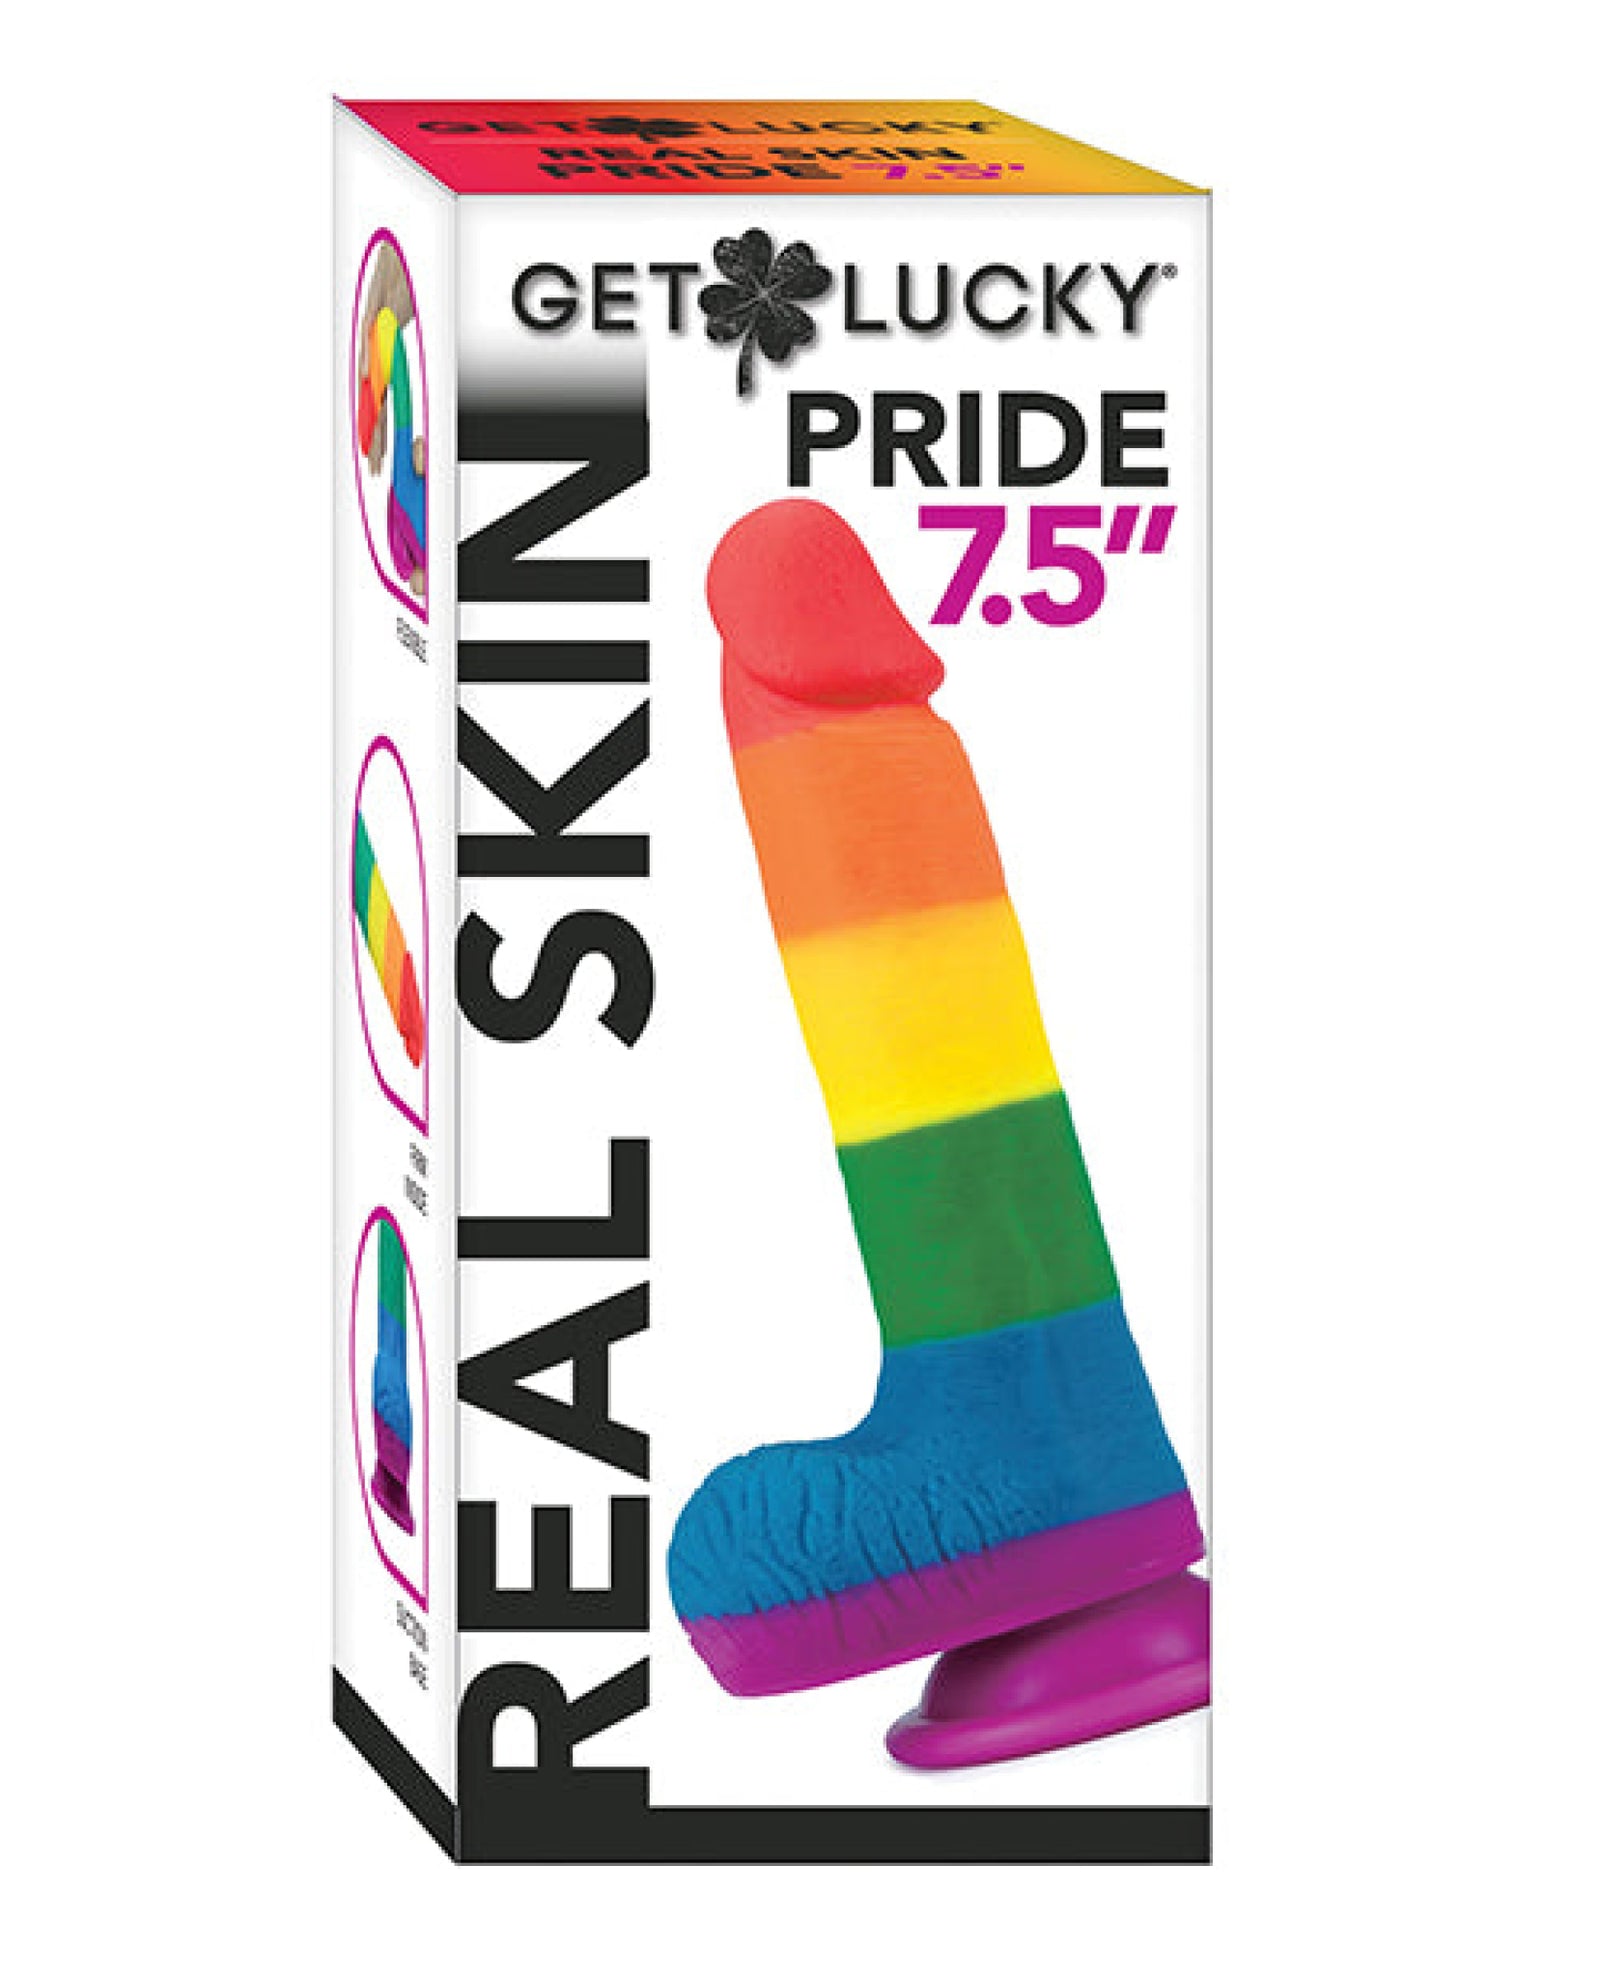 Get Lucky 7.5" Real Skin Series Pride- Rainbow Get Lucky